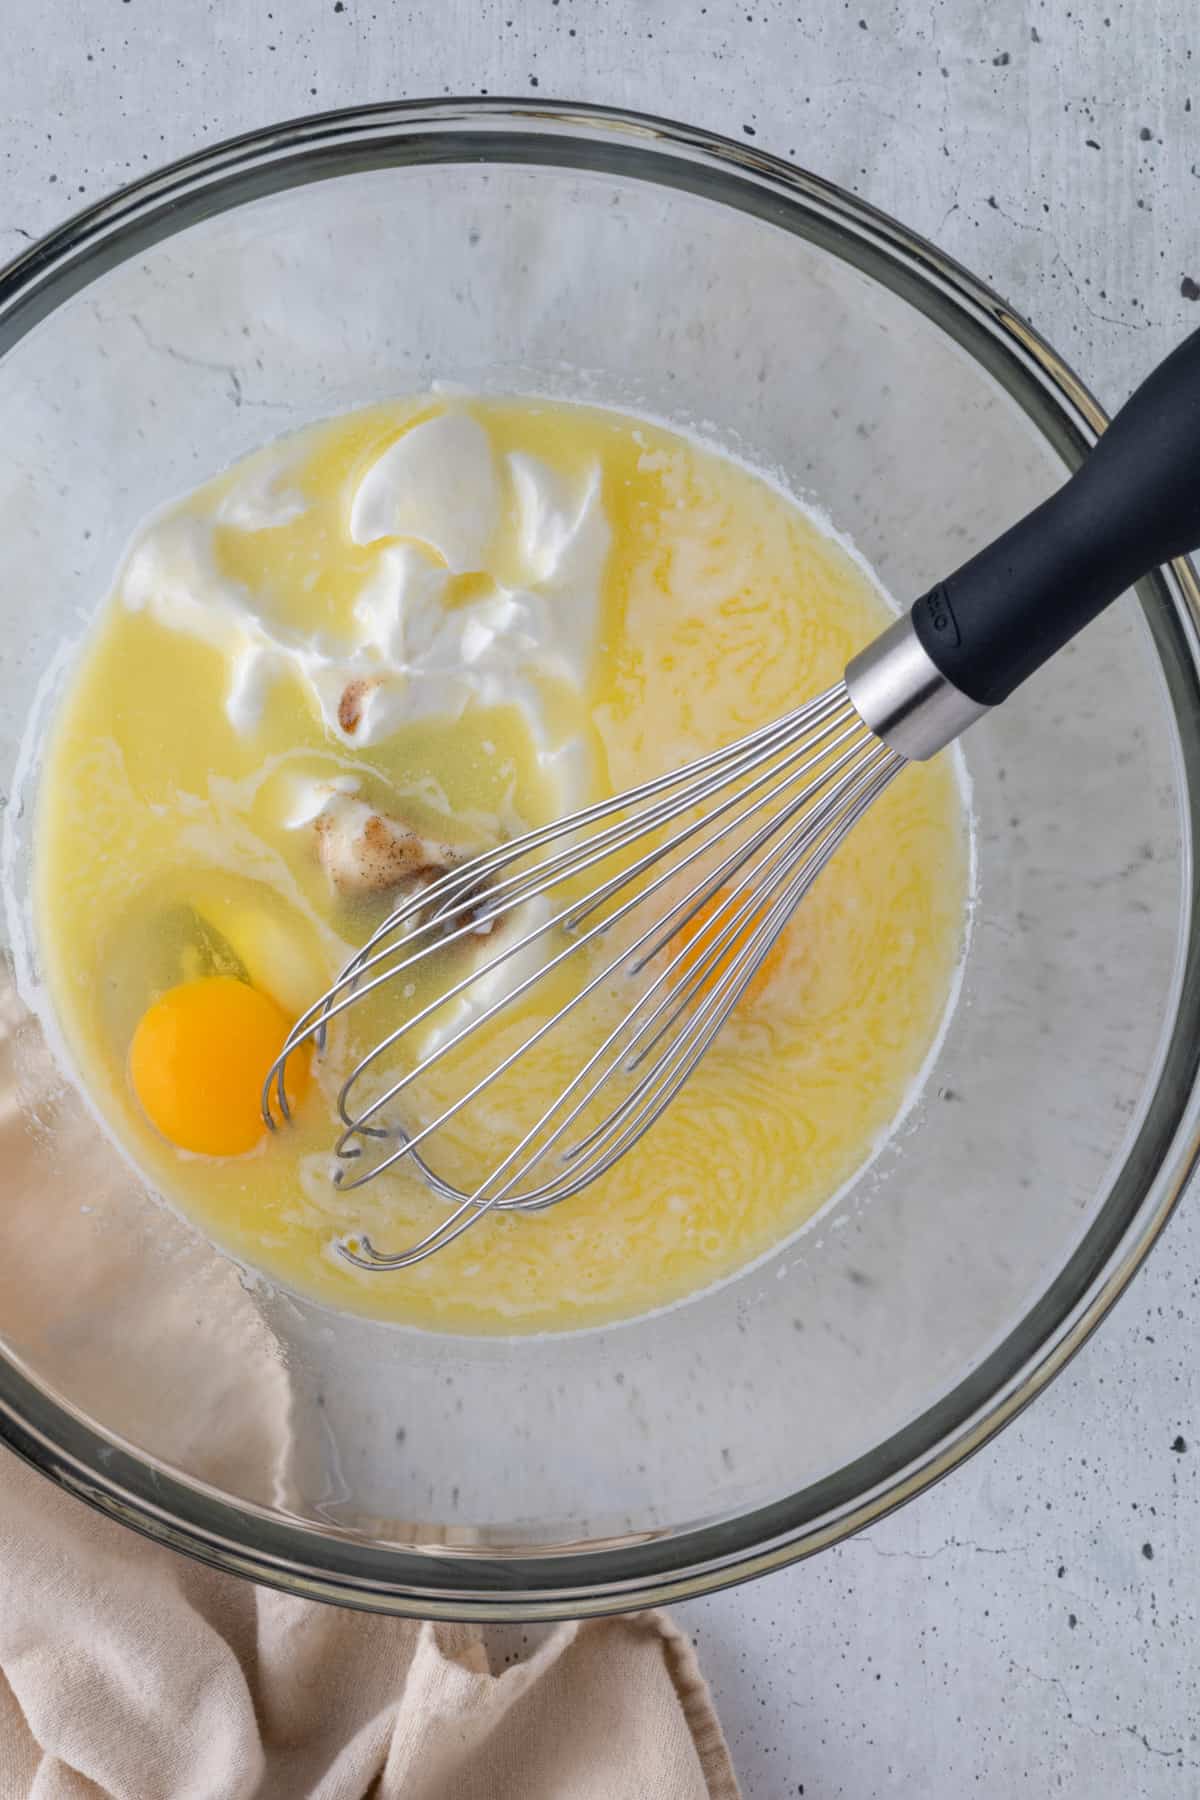 The wet ingredients in a large bowl with a large whisk.